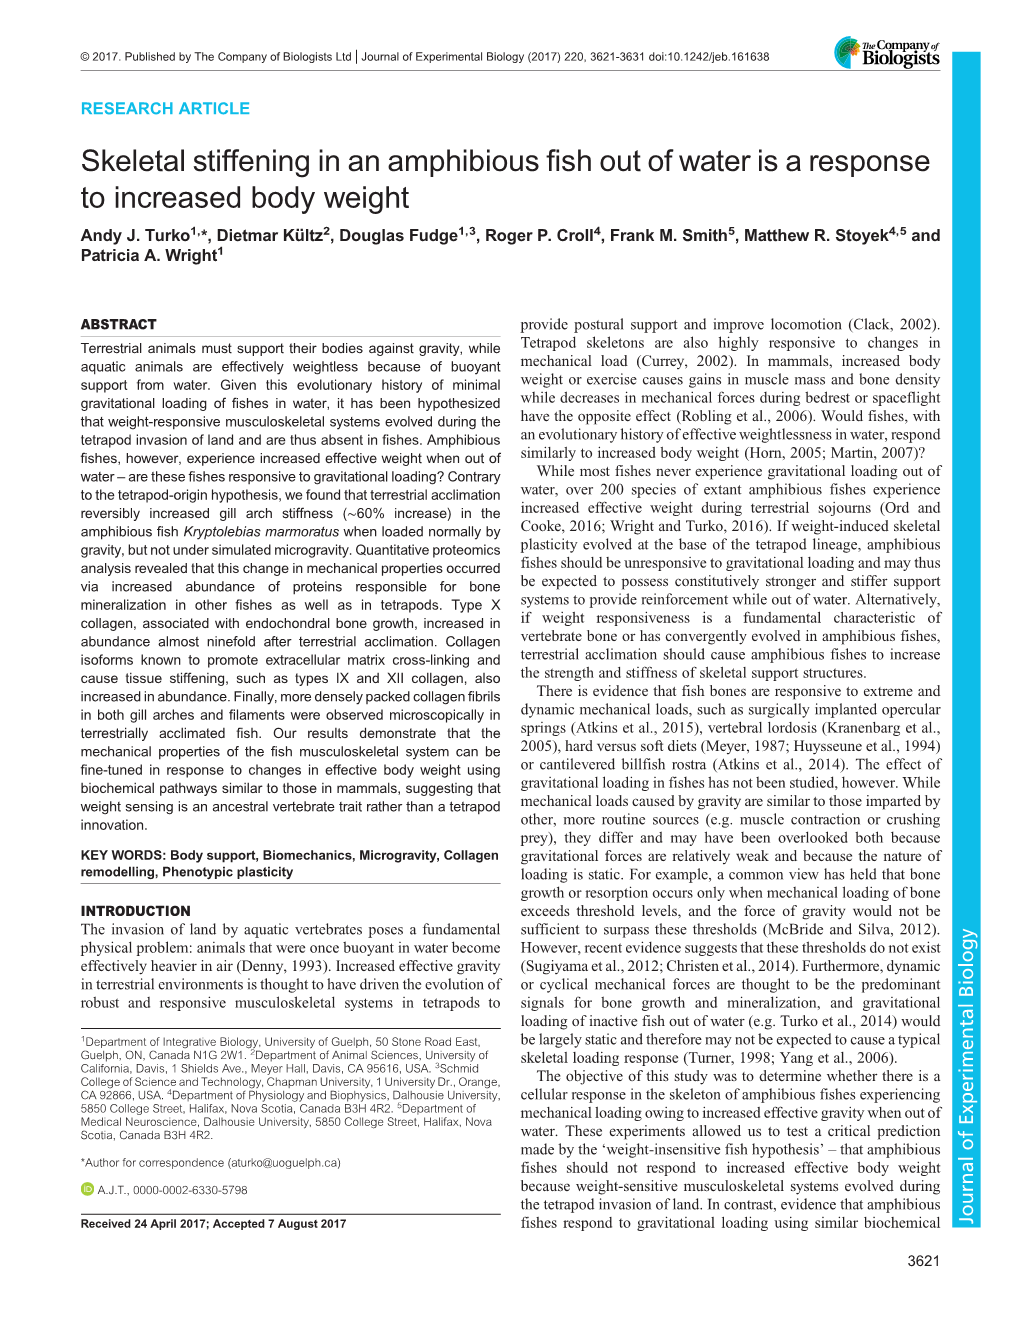 Skeletal Stiffening in an Amphibious Fish out of Water Is a Response to Increased Body Weight Andy J